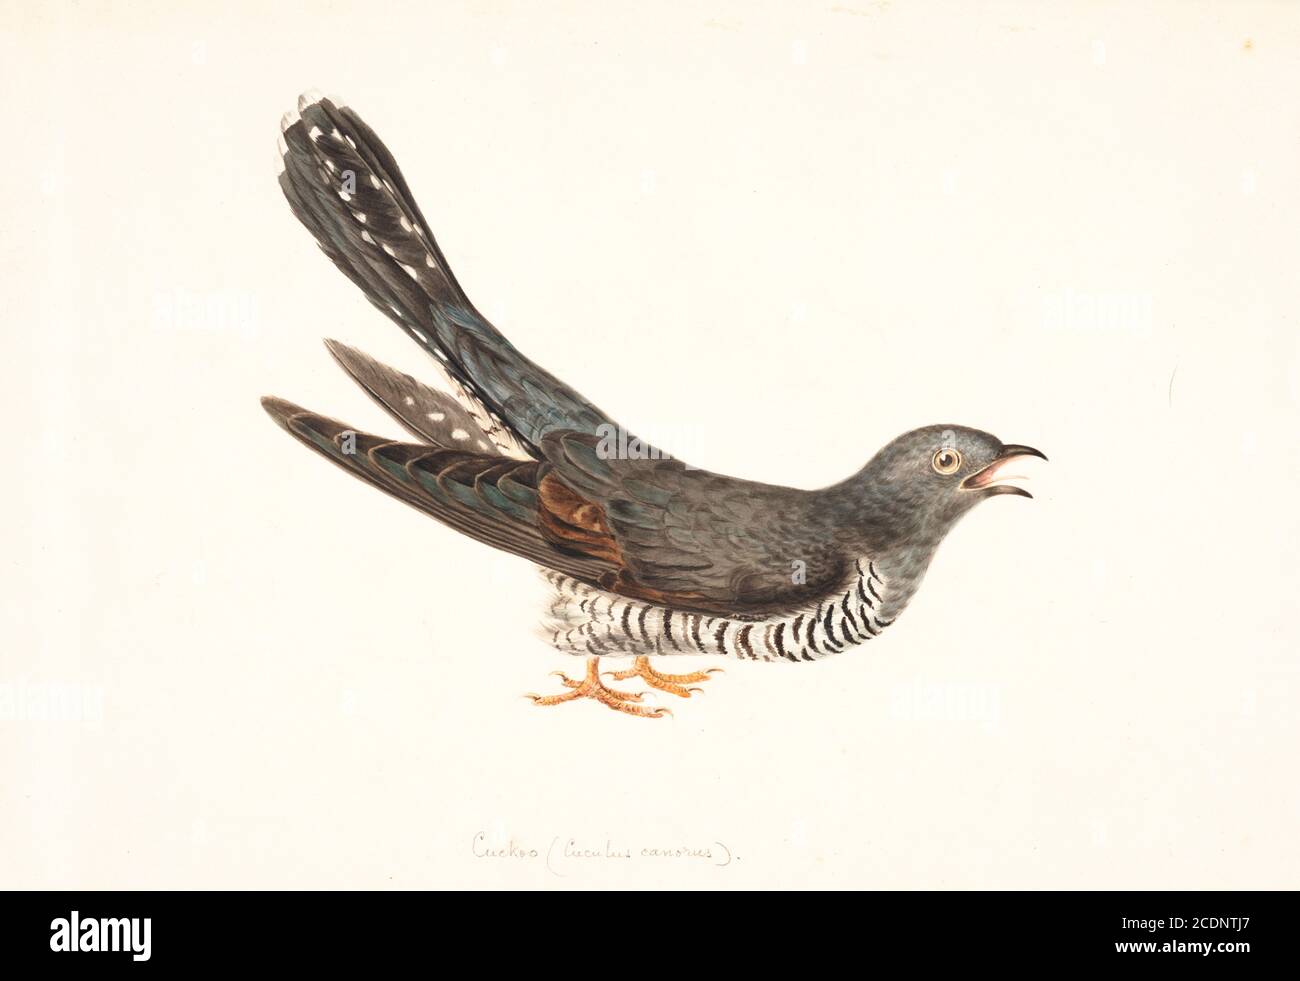 Common cuckoo (Cuculus canorus), artwork. Common cuckoos are brood parasites. That is, they lay their eggs in the nest of other birds, leaving the costly rearing of their young to the owner of the nest. 18th century watercolor painting by Elizabeth Gwillim. Lady Elizabeth Symonds Gwillim (21 April 1763 – 21 December 1807) was an artist married to Sir Henry Gwillim, Puisne Judge at the Madras high court until 1808. Lady Gwillim painted a series of about 200 watercolours of Indian birds. Produced about 20 years before John James Audubon, her work has been acclaimed for its accuracy and natural p Stock Photo